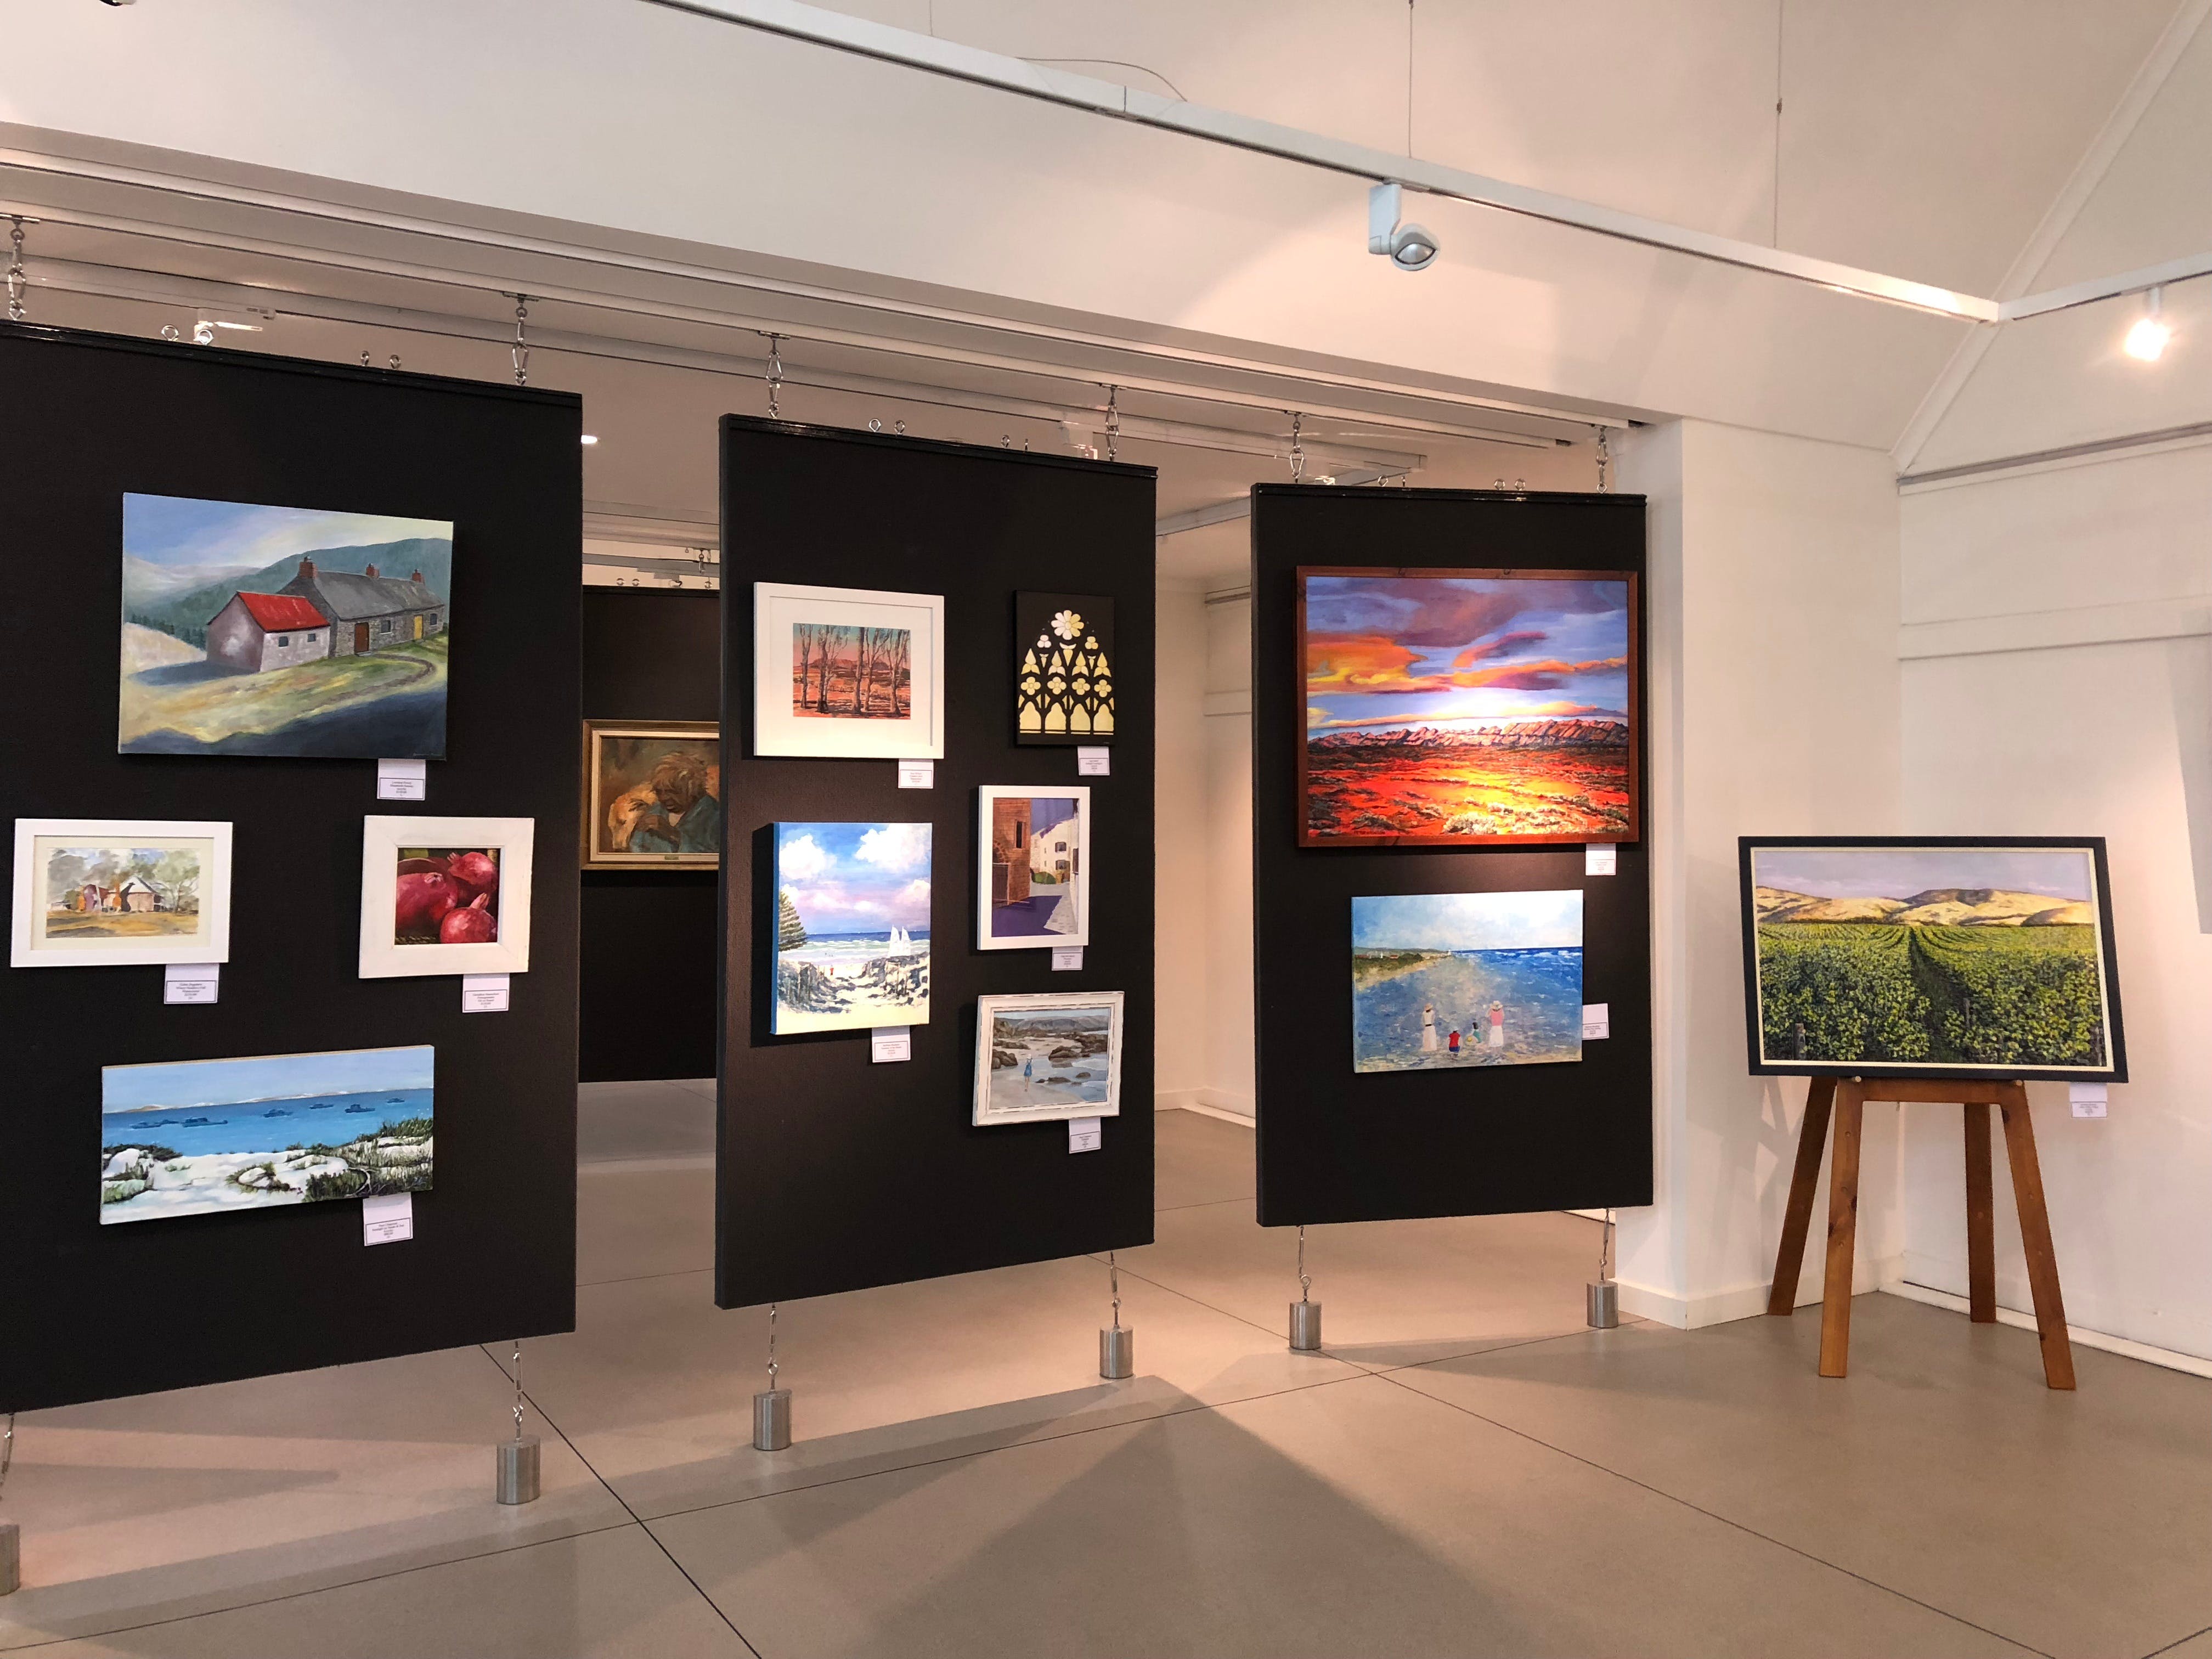 SALA 2020 exhibition at The Ascot Community Exhibition Art Gallery. - Accommodation Bookings